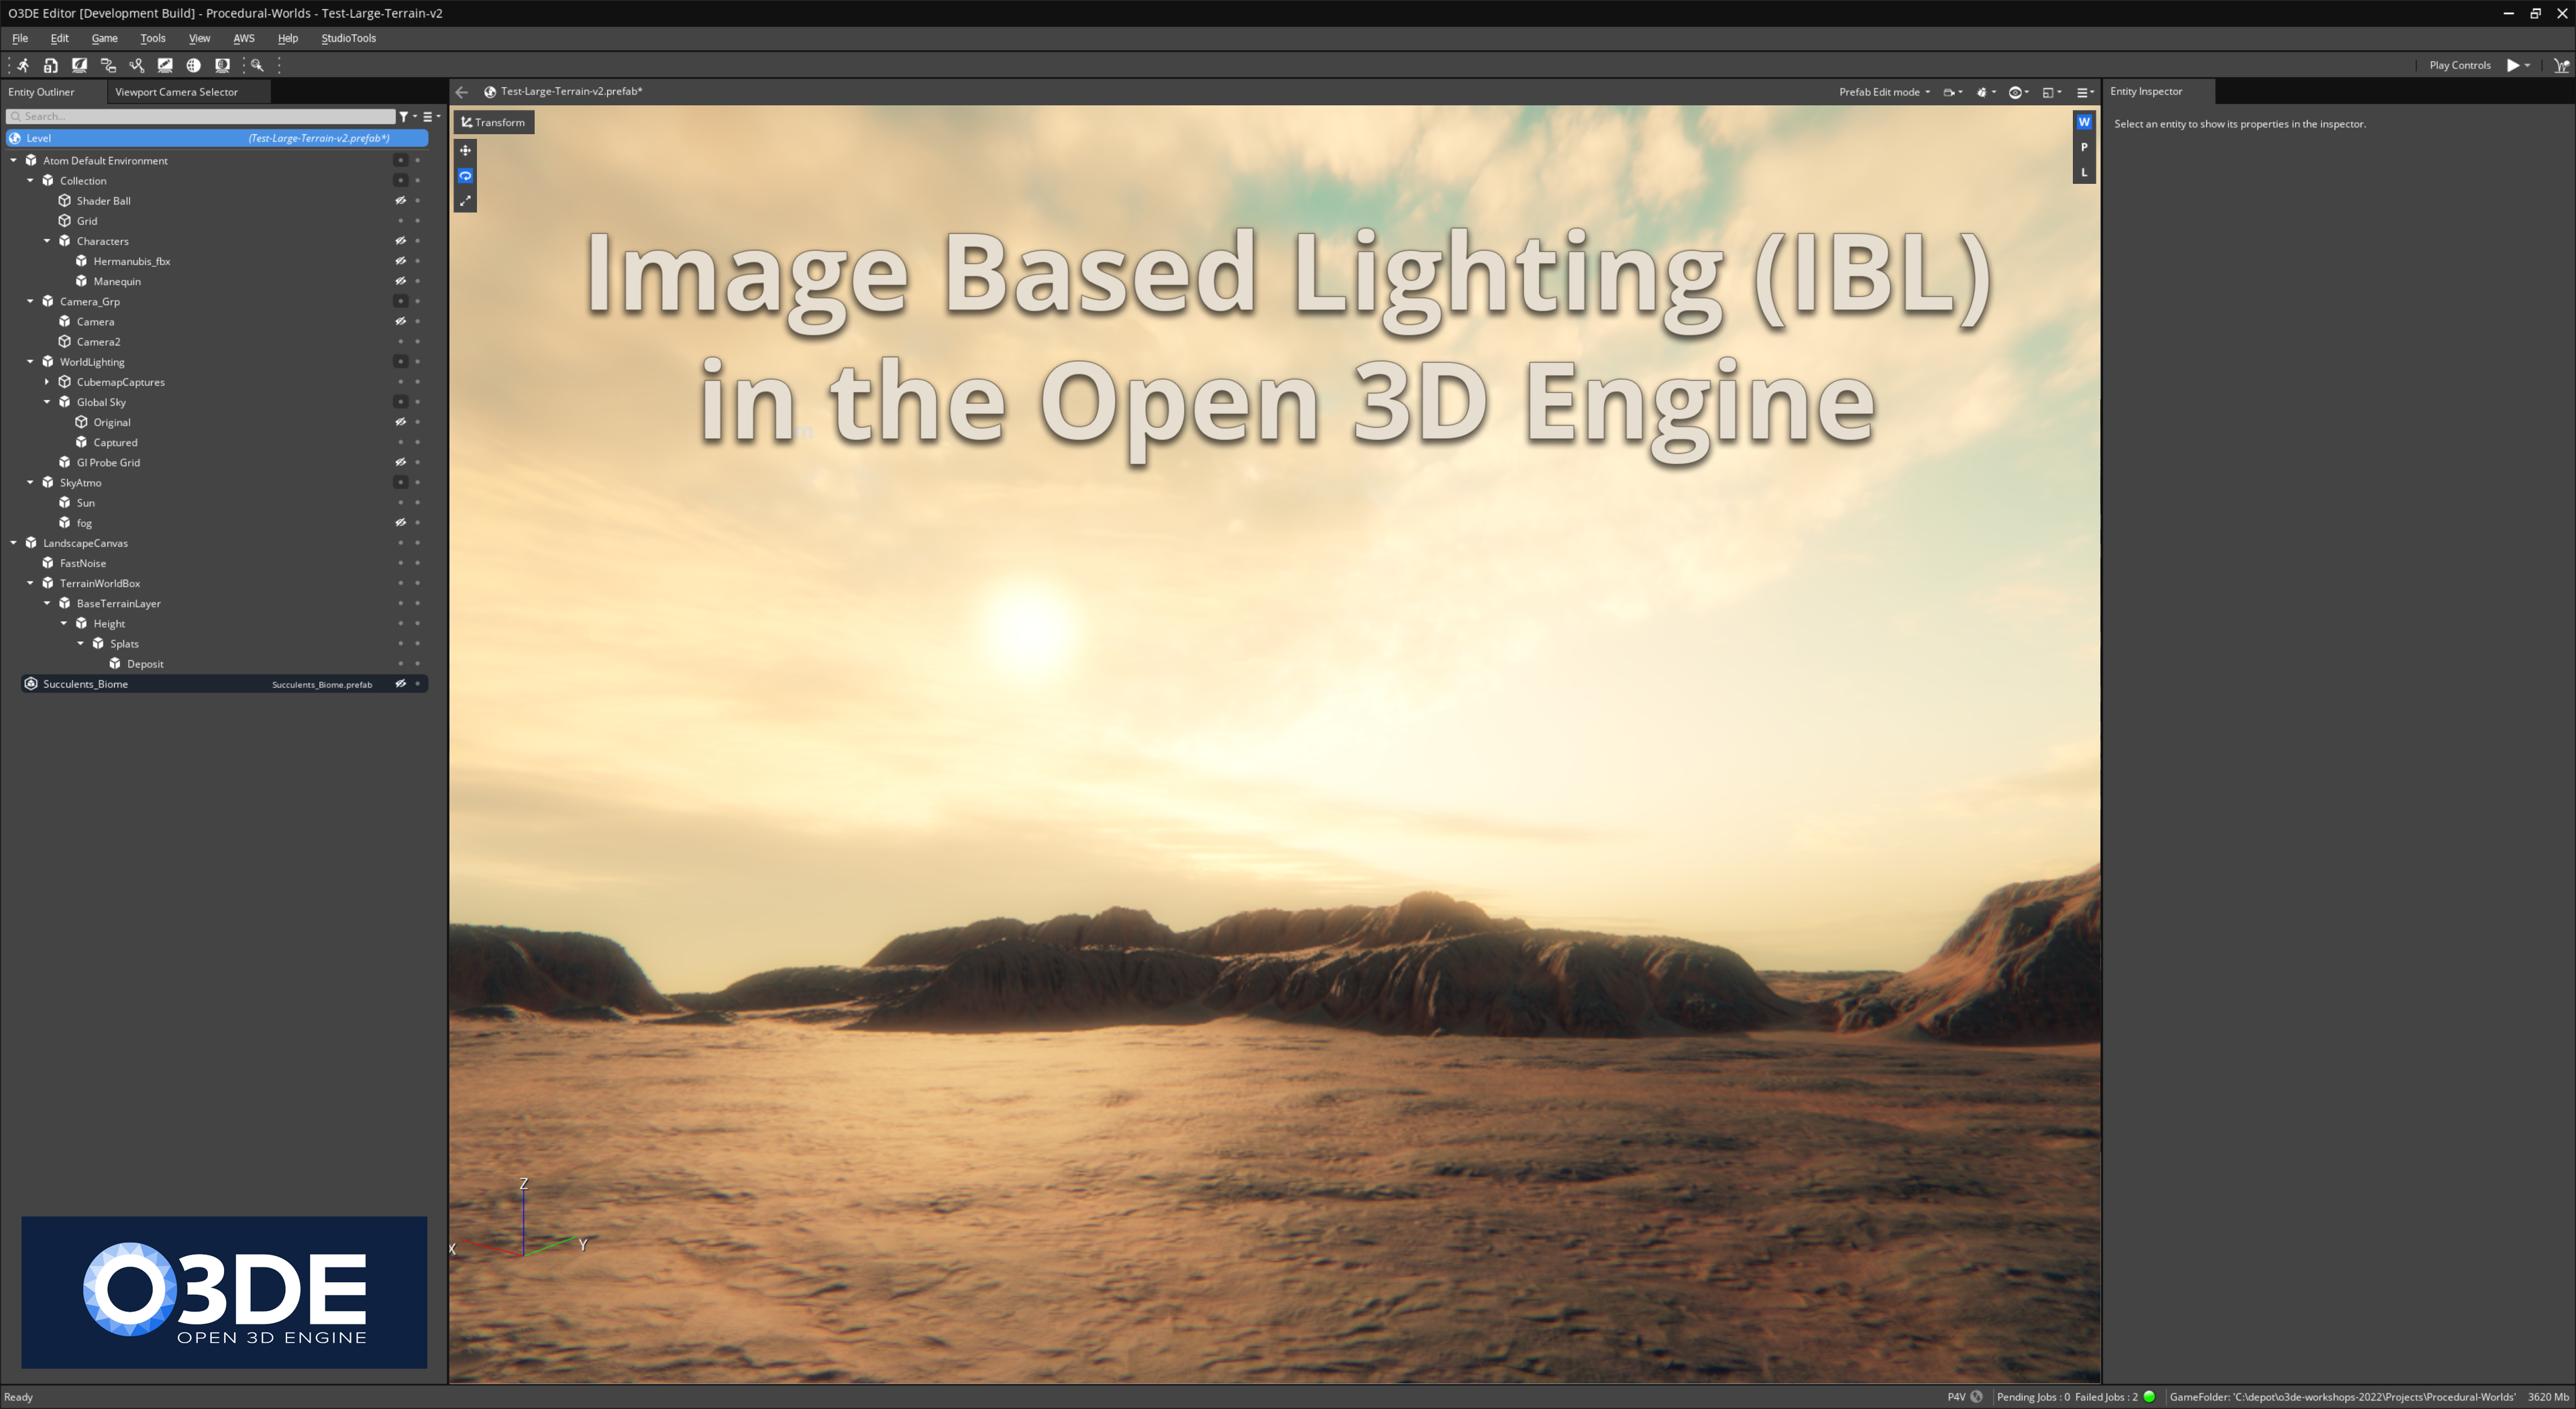 Working with Image Based Lighting (IBL) in O3DE